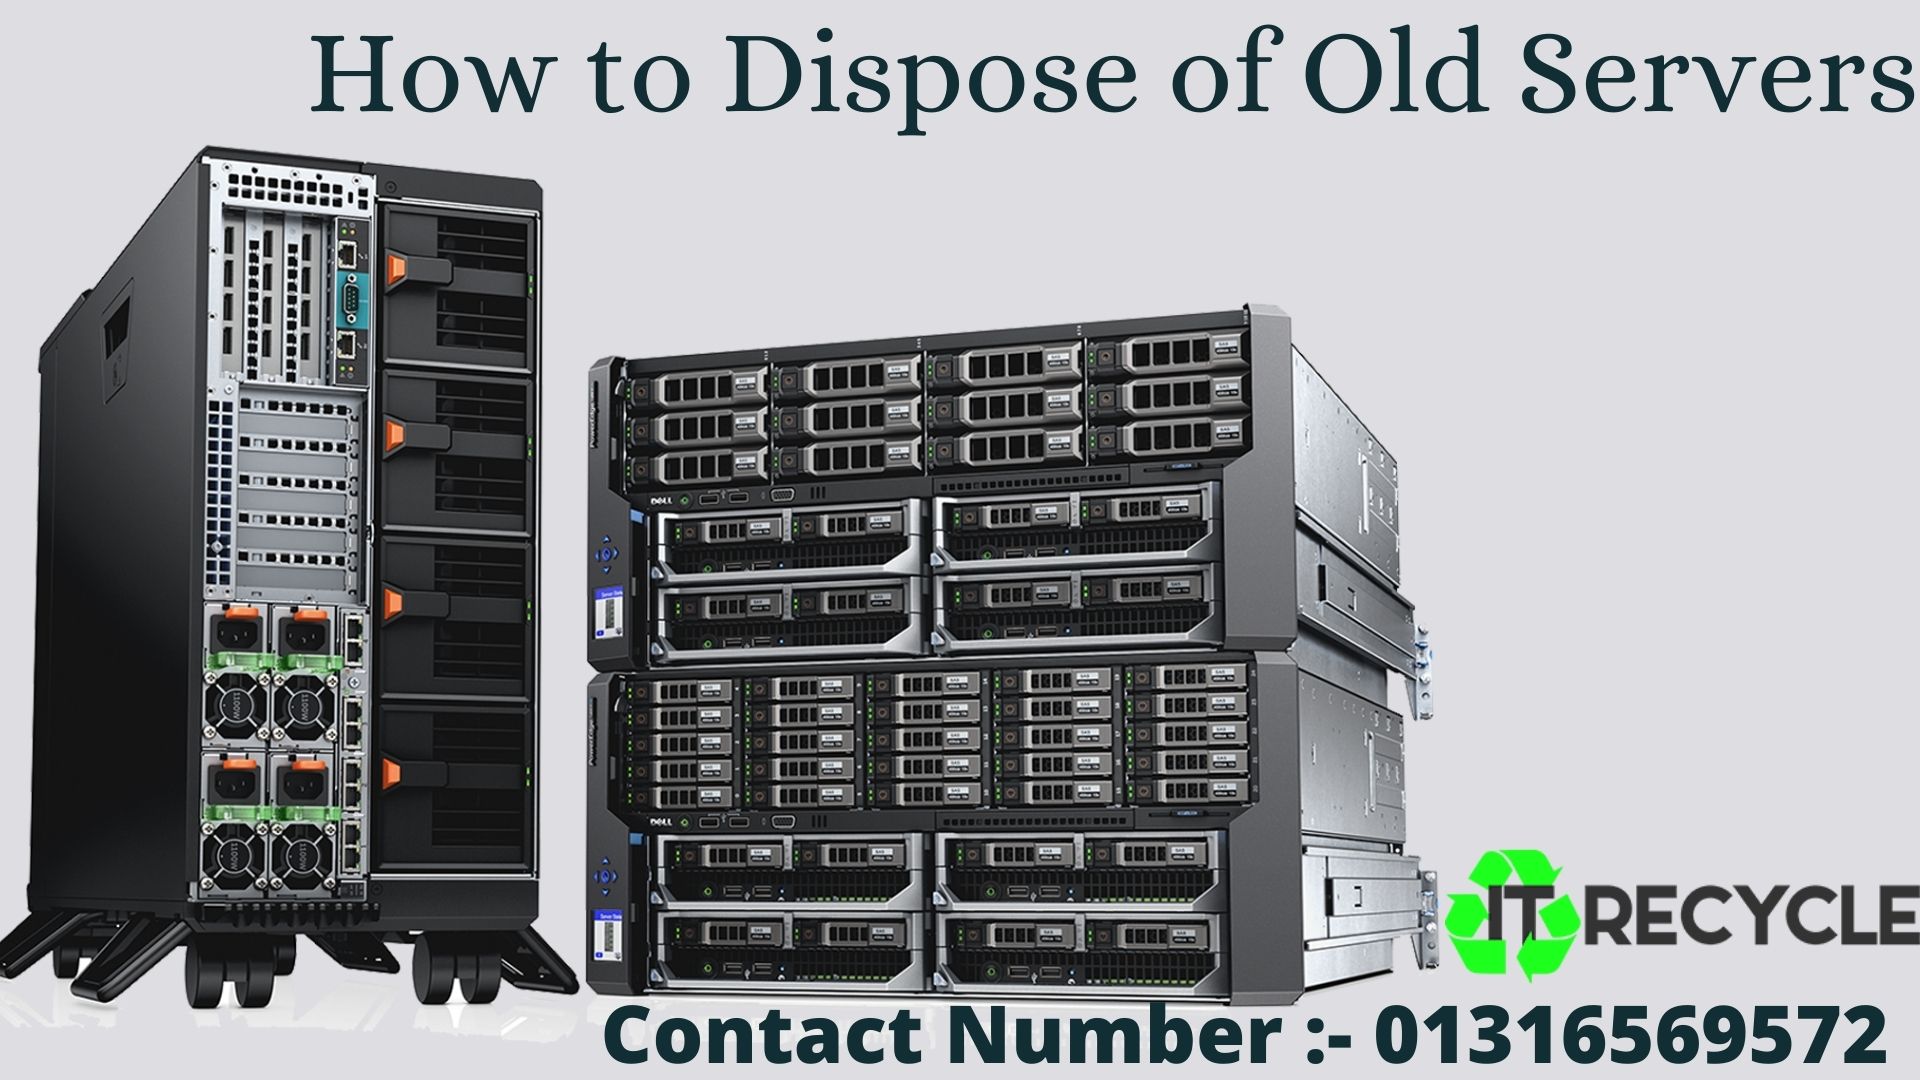 Dispose of Old Servers